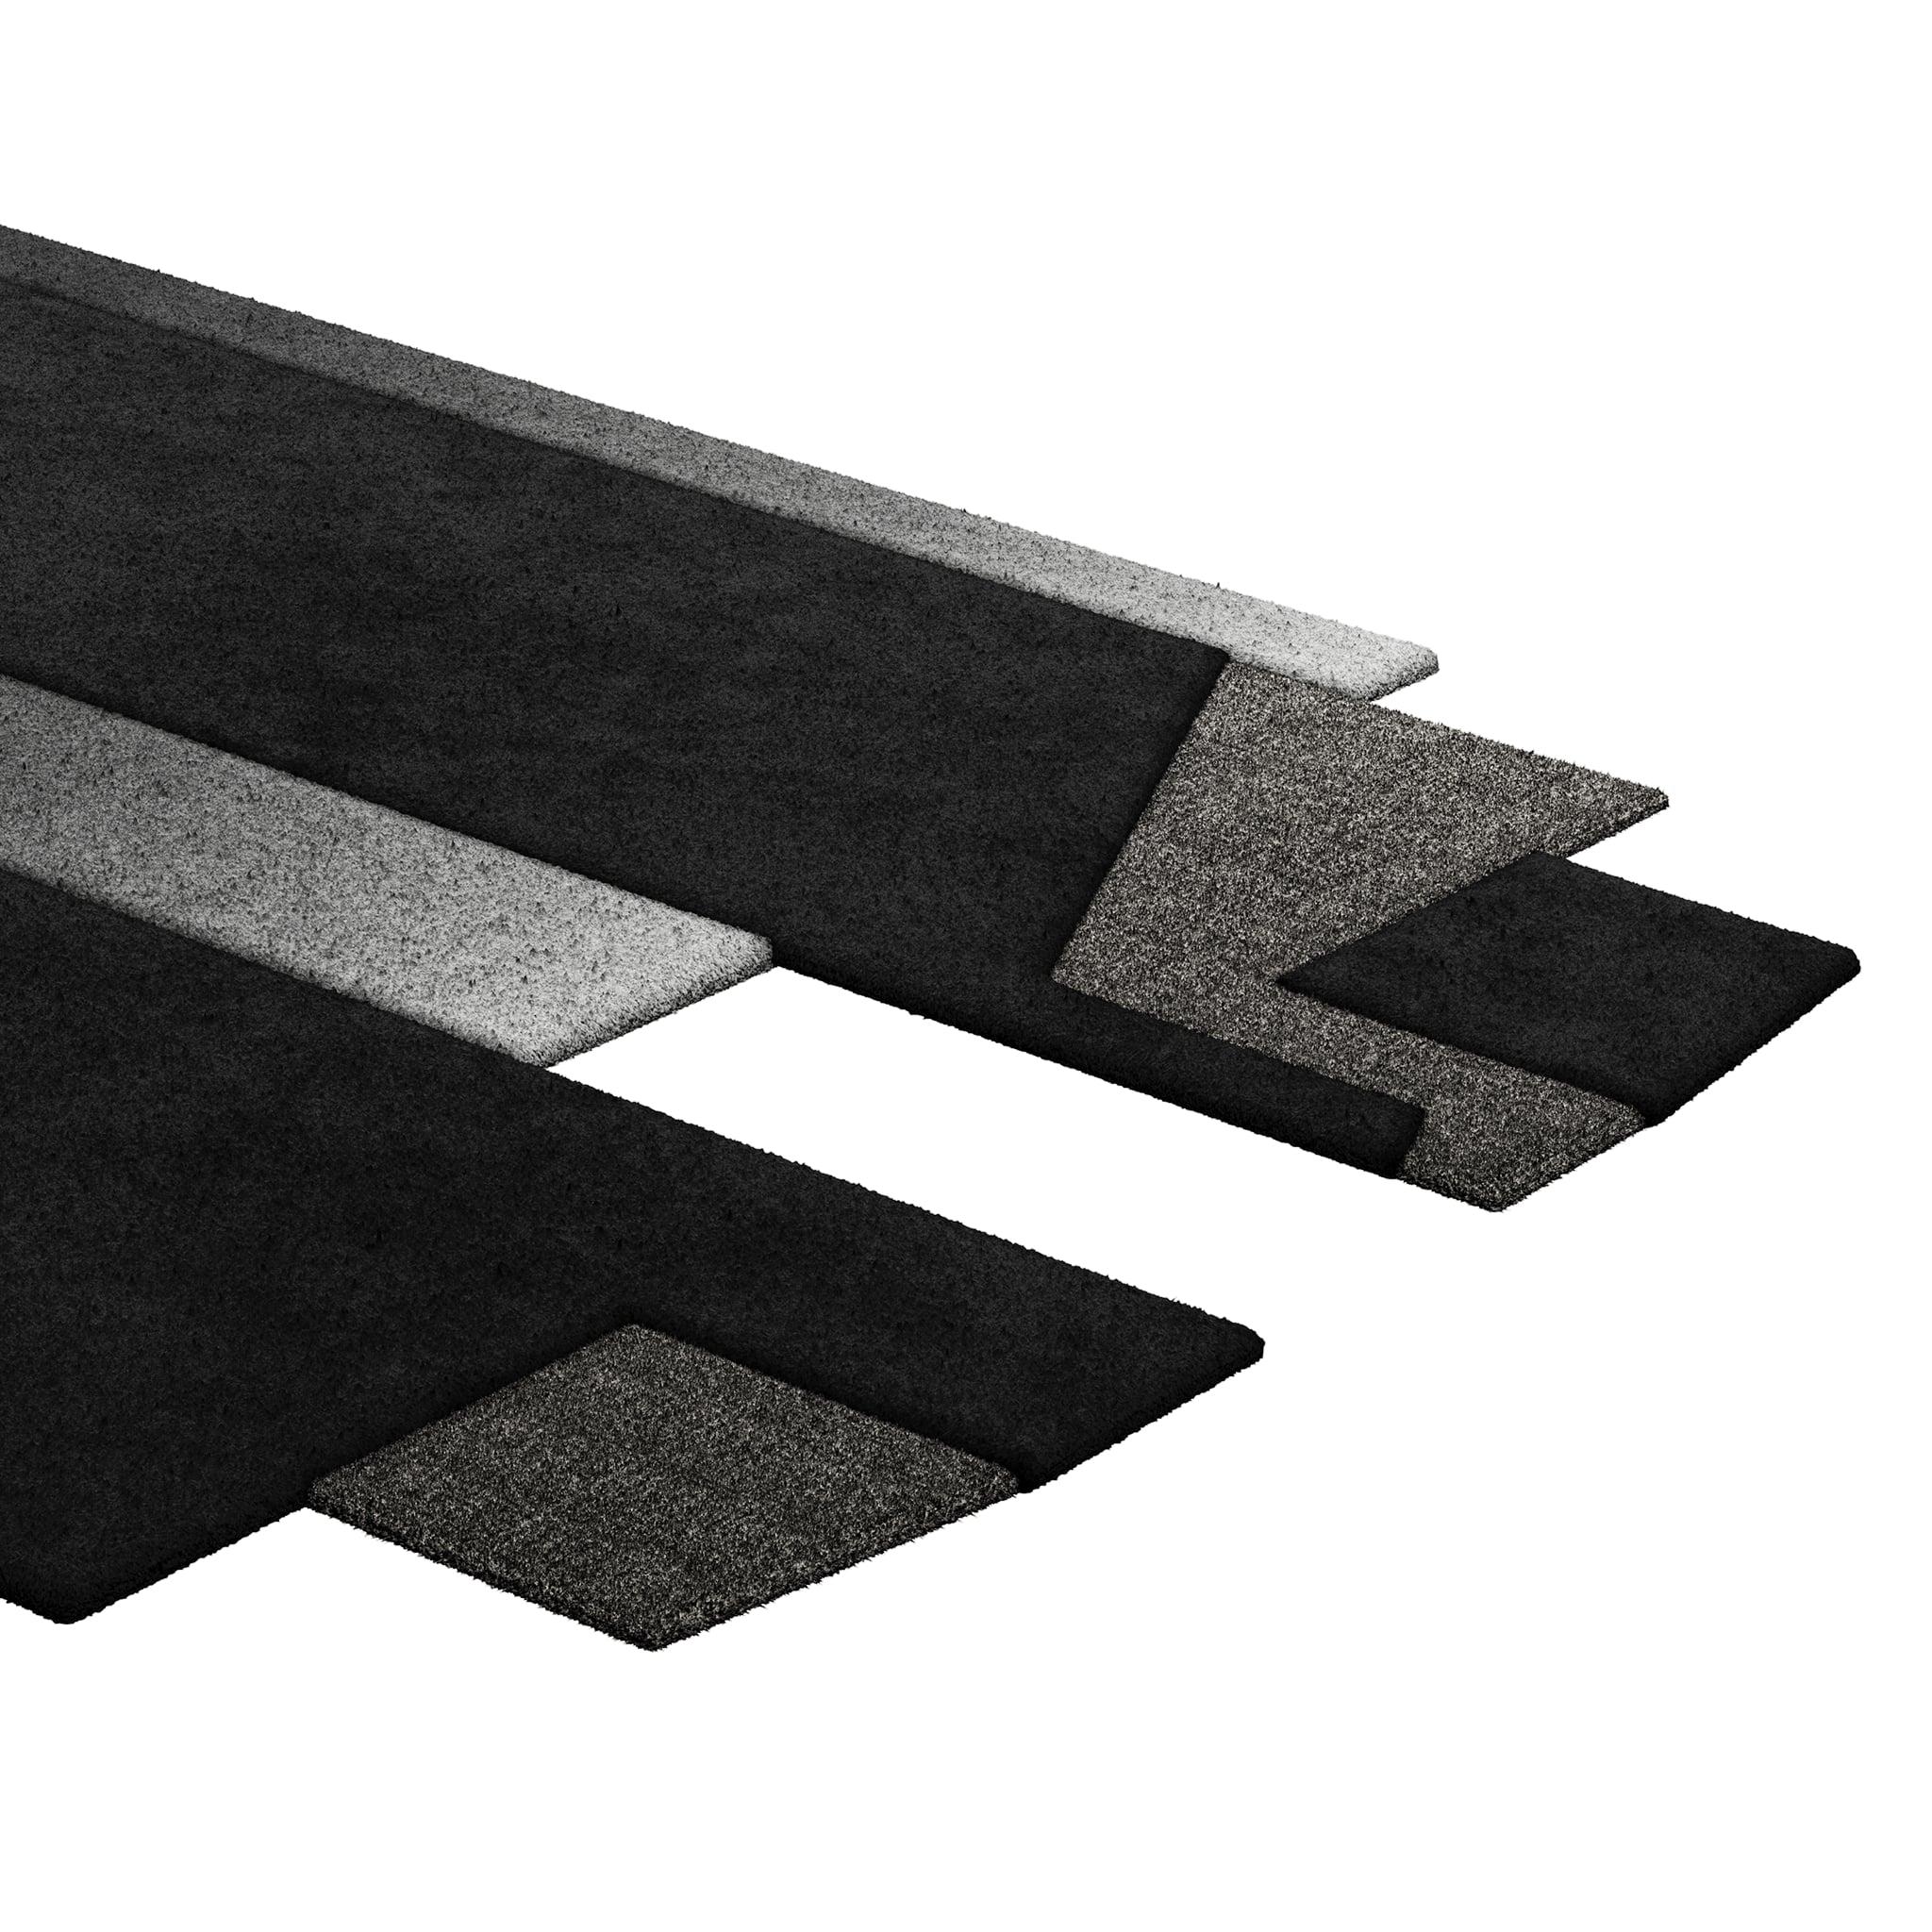 Tapis Retro #004 is a retro rug with an irregular shape and monochromatic hues. Inspired by architectural lines, this geometric rug makes a statement in any living space.

Using a 3D-tufted technique that combines cut and loop pile, the retro rug